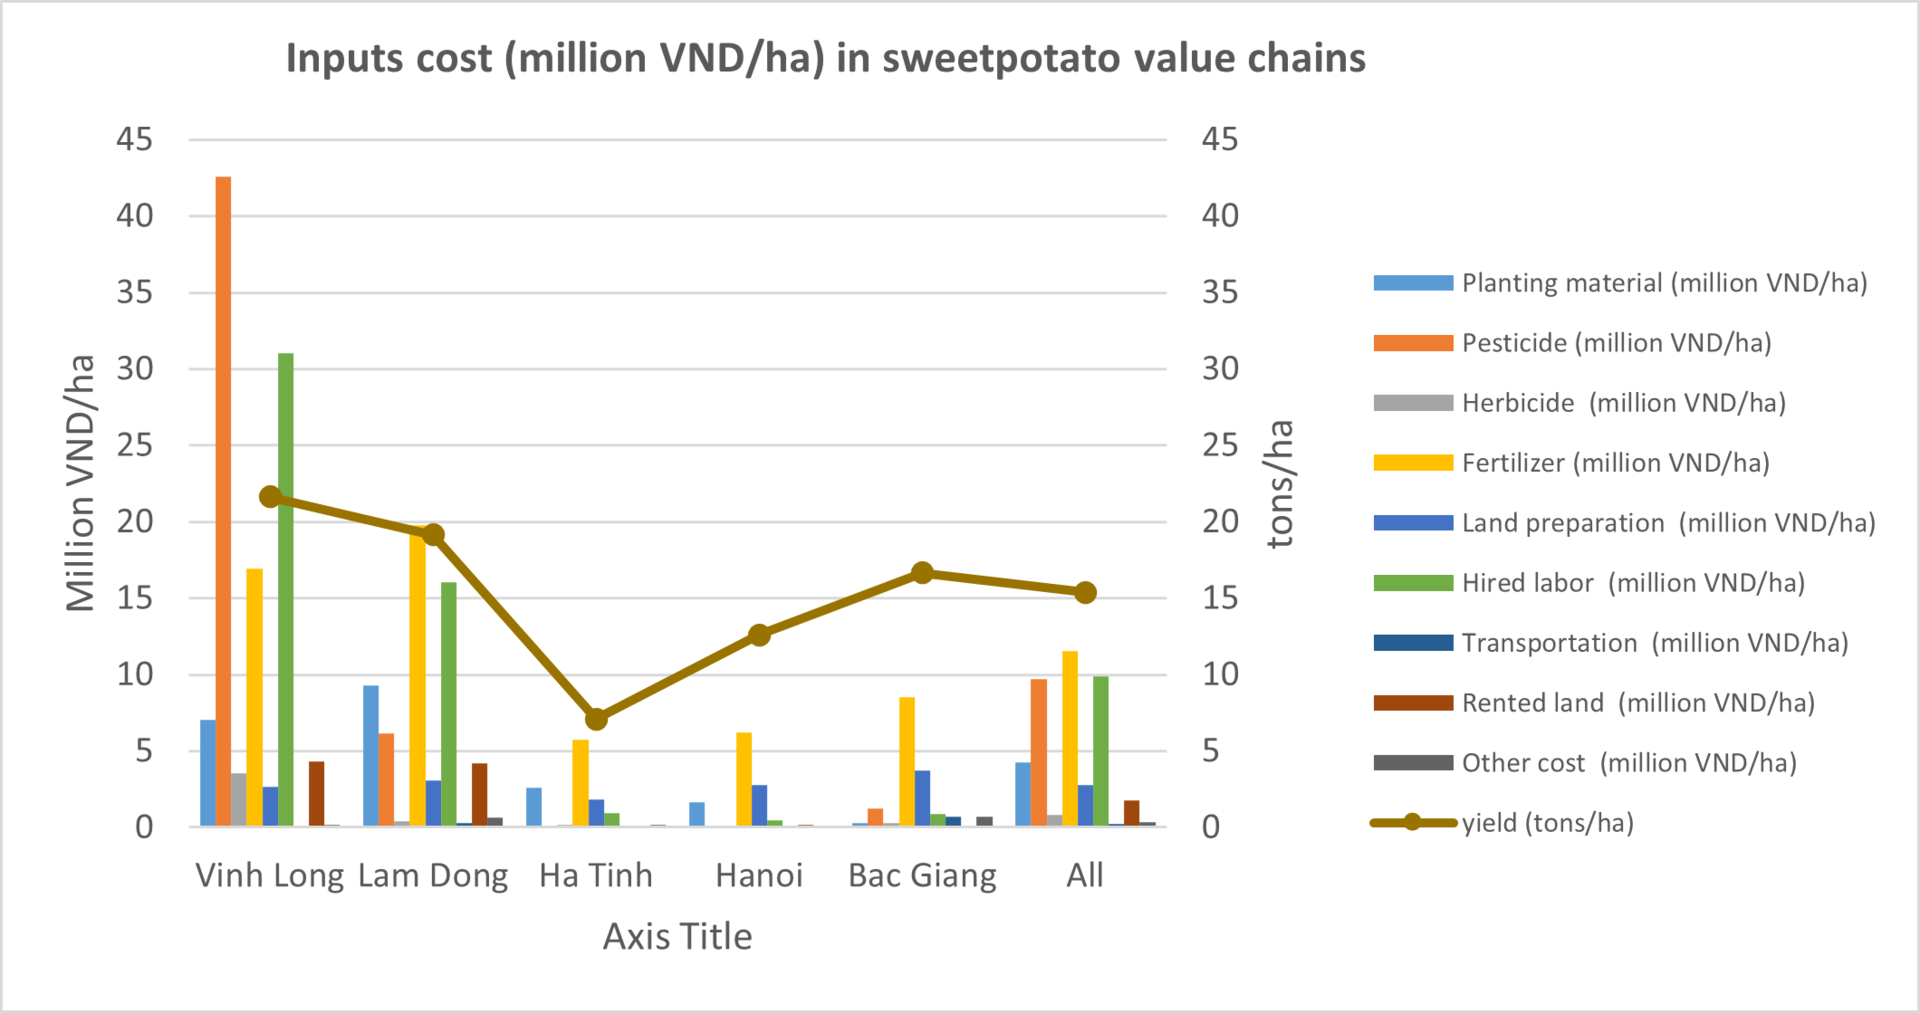 Figure 3: Input costs (million VND/ha) and yields (tons/ha) in sweet potato value chains, by provinces